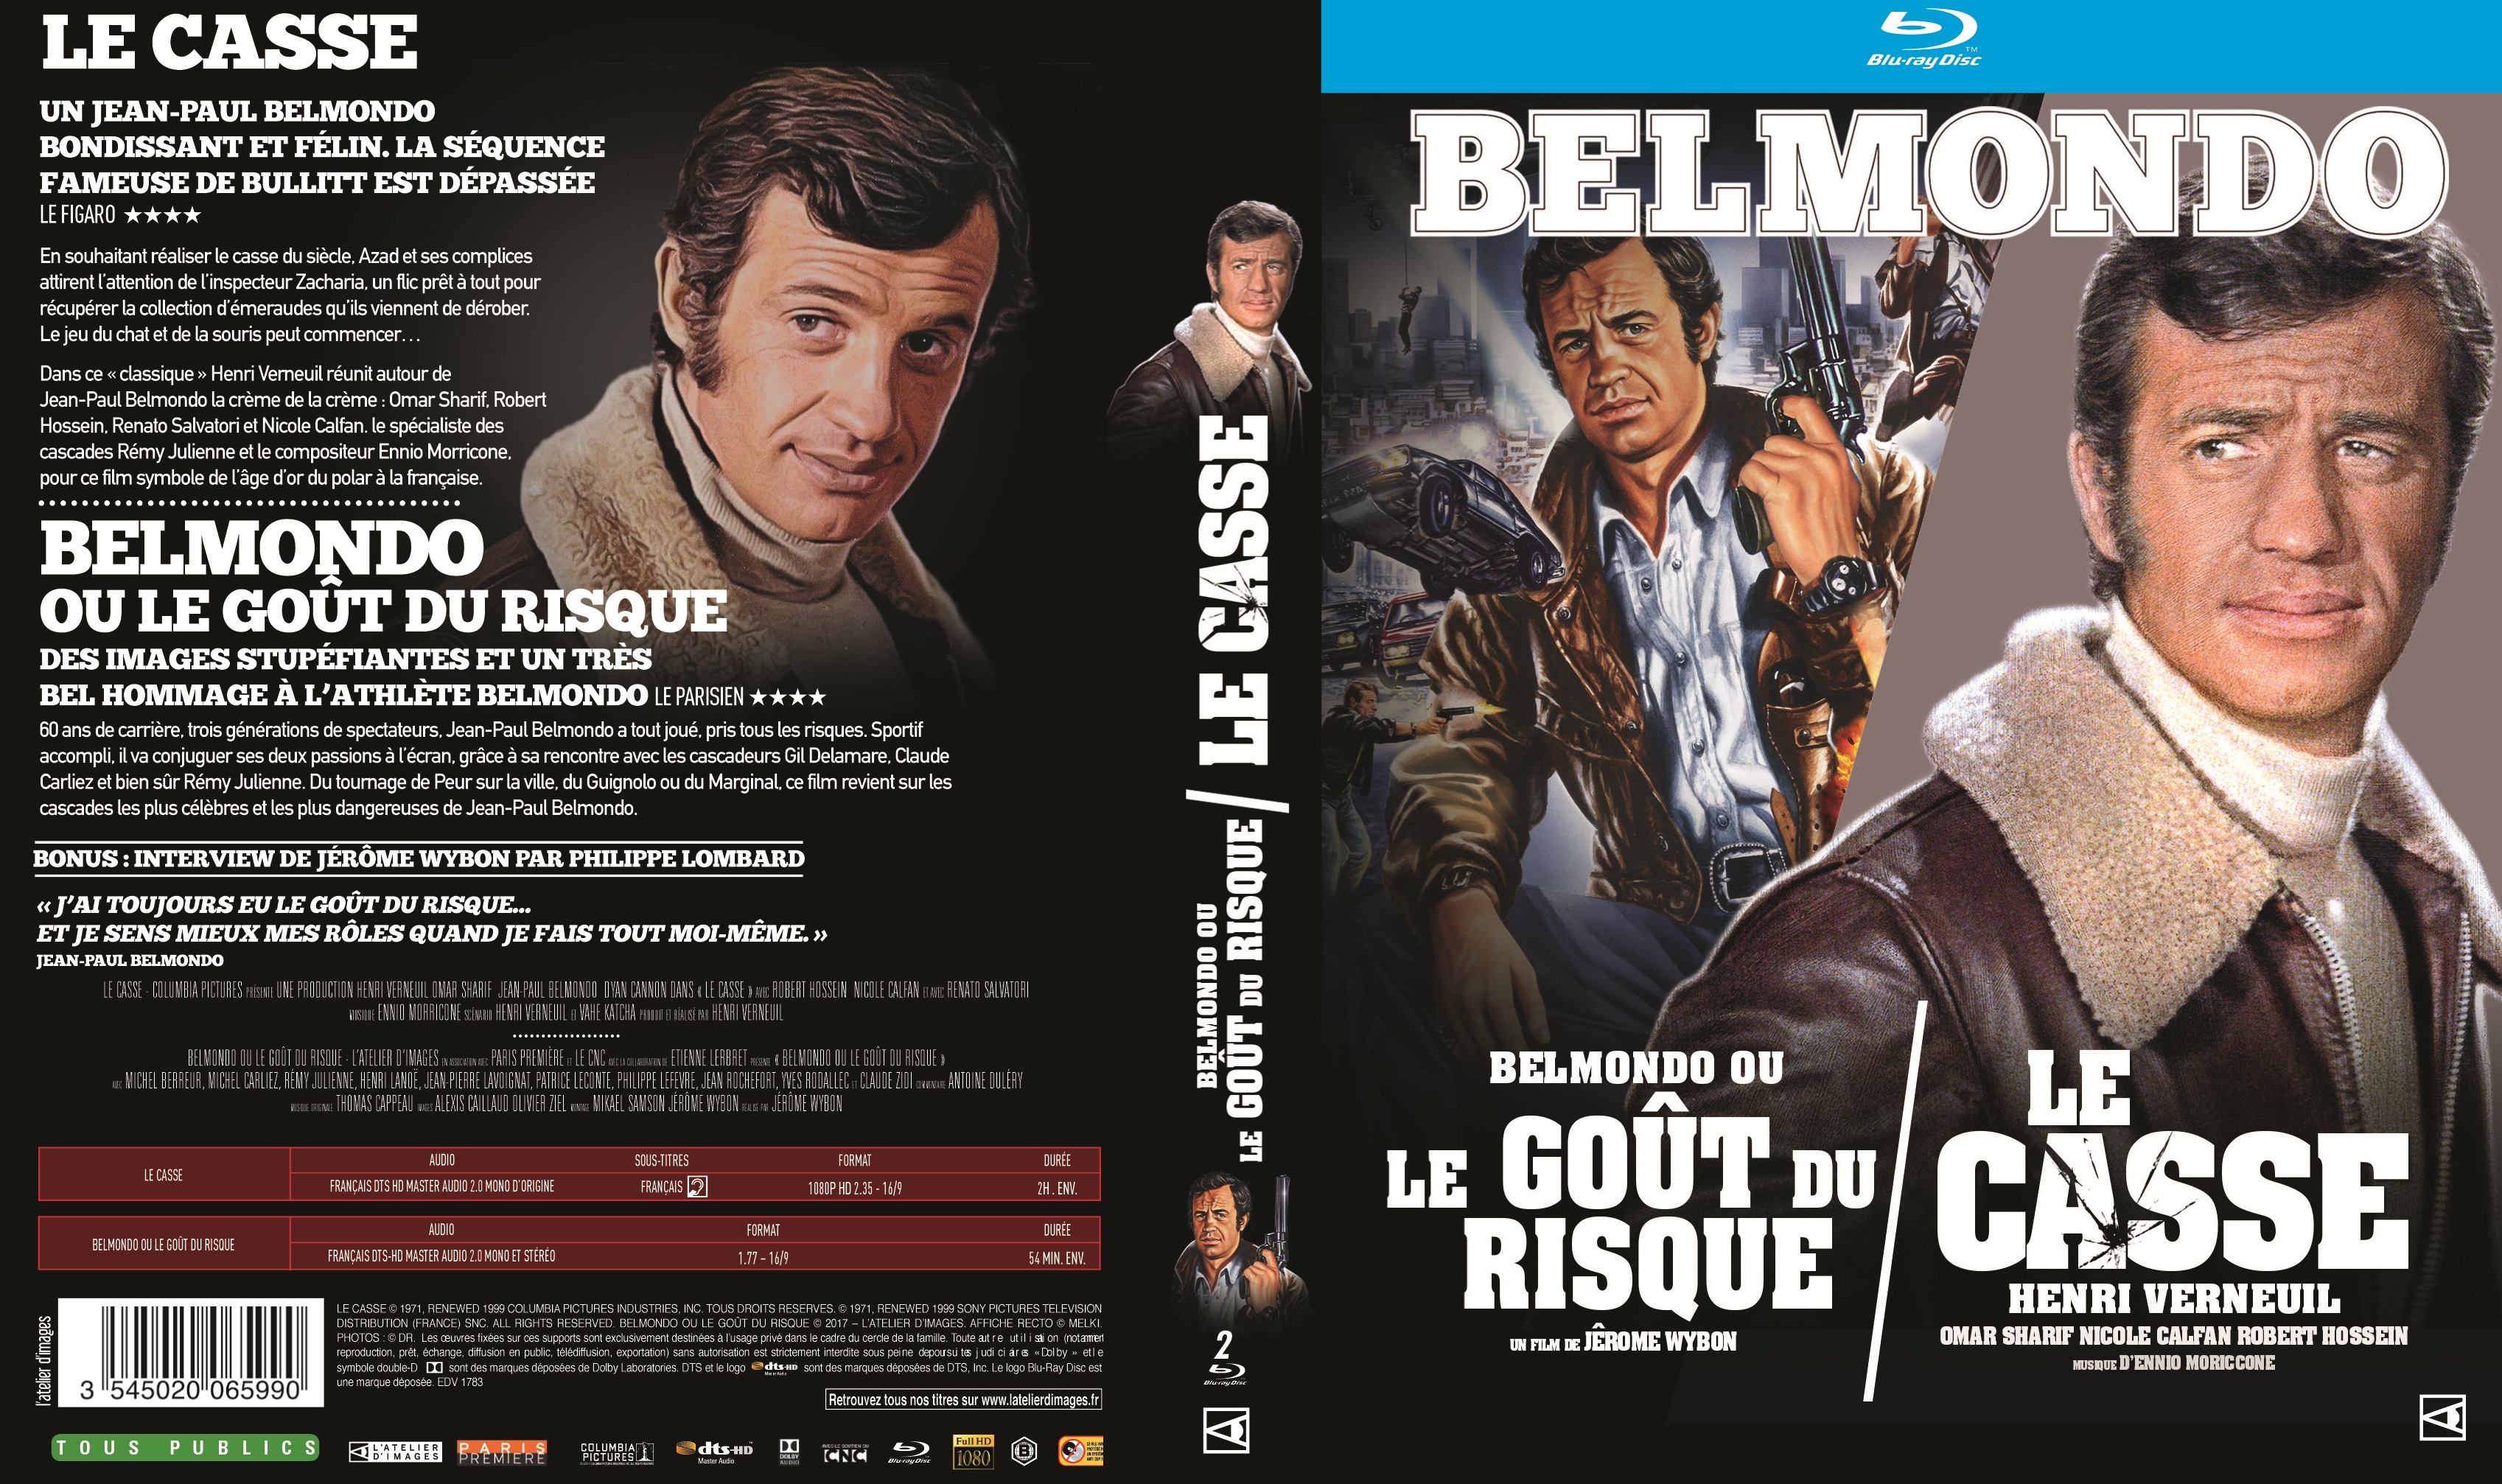 Jaquette DVD Le casse (BLU-RAY) v2